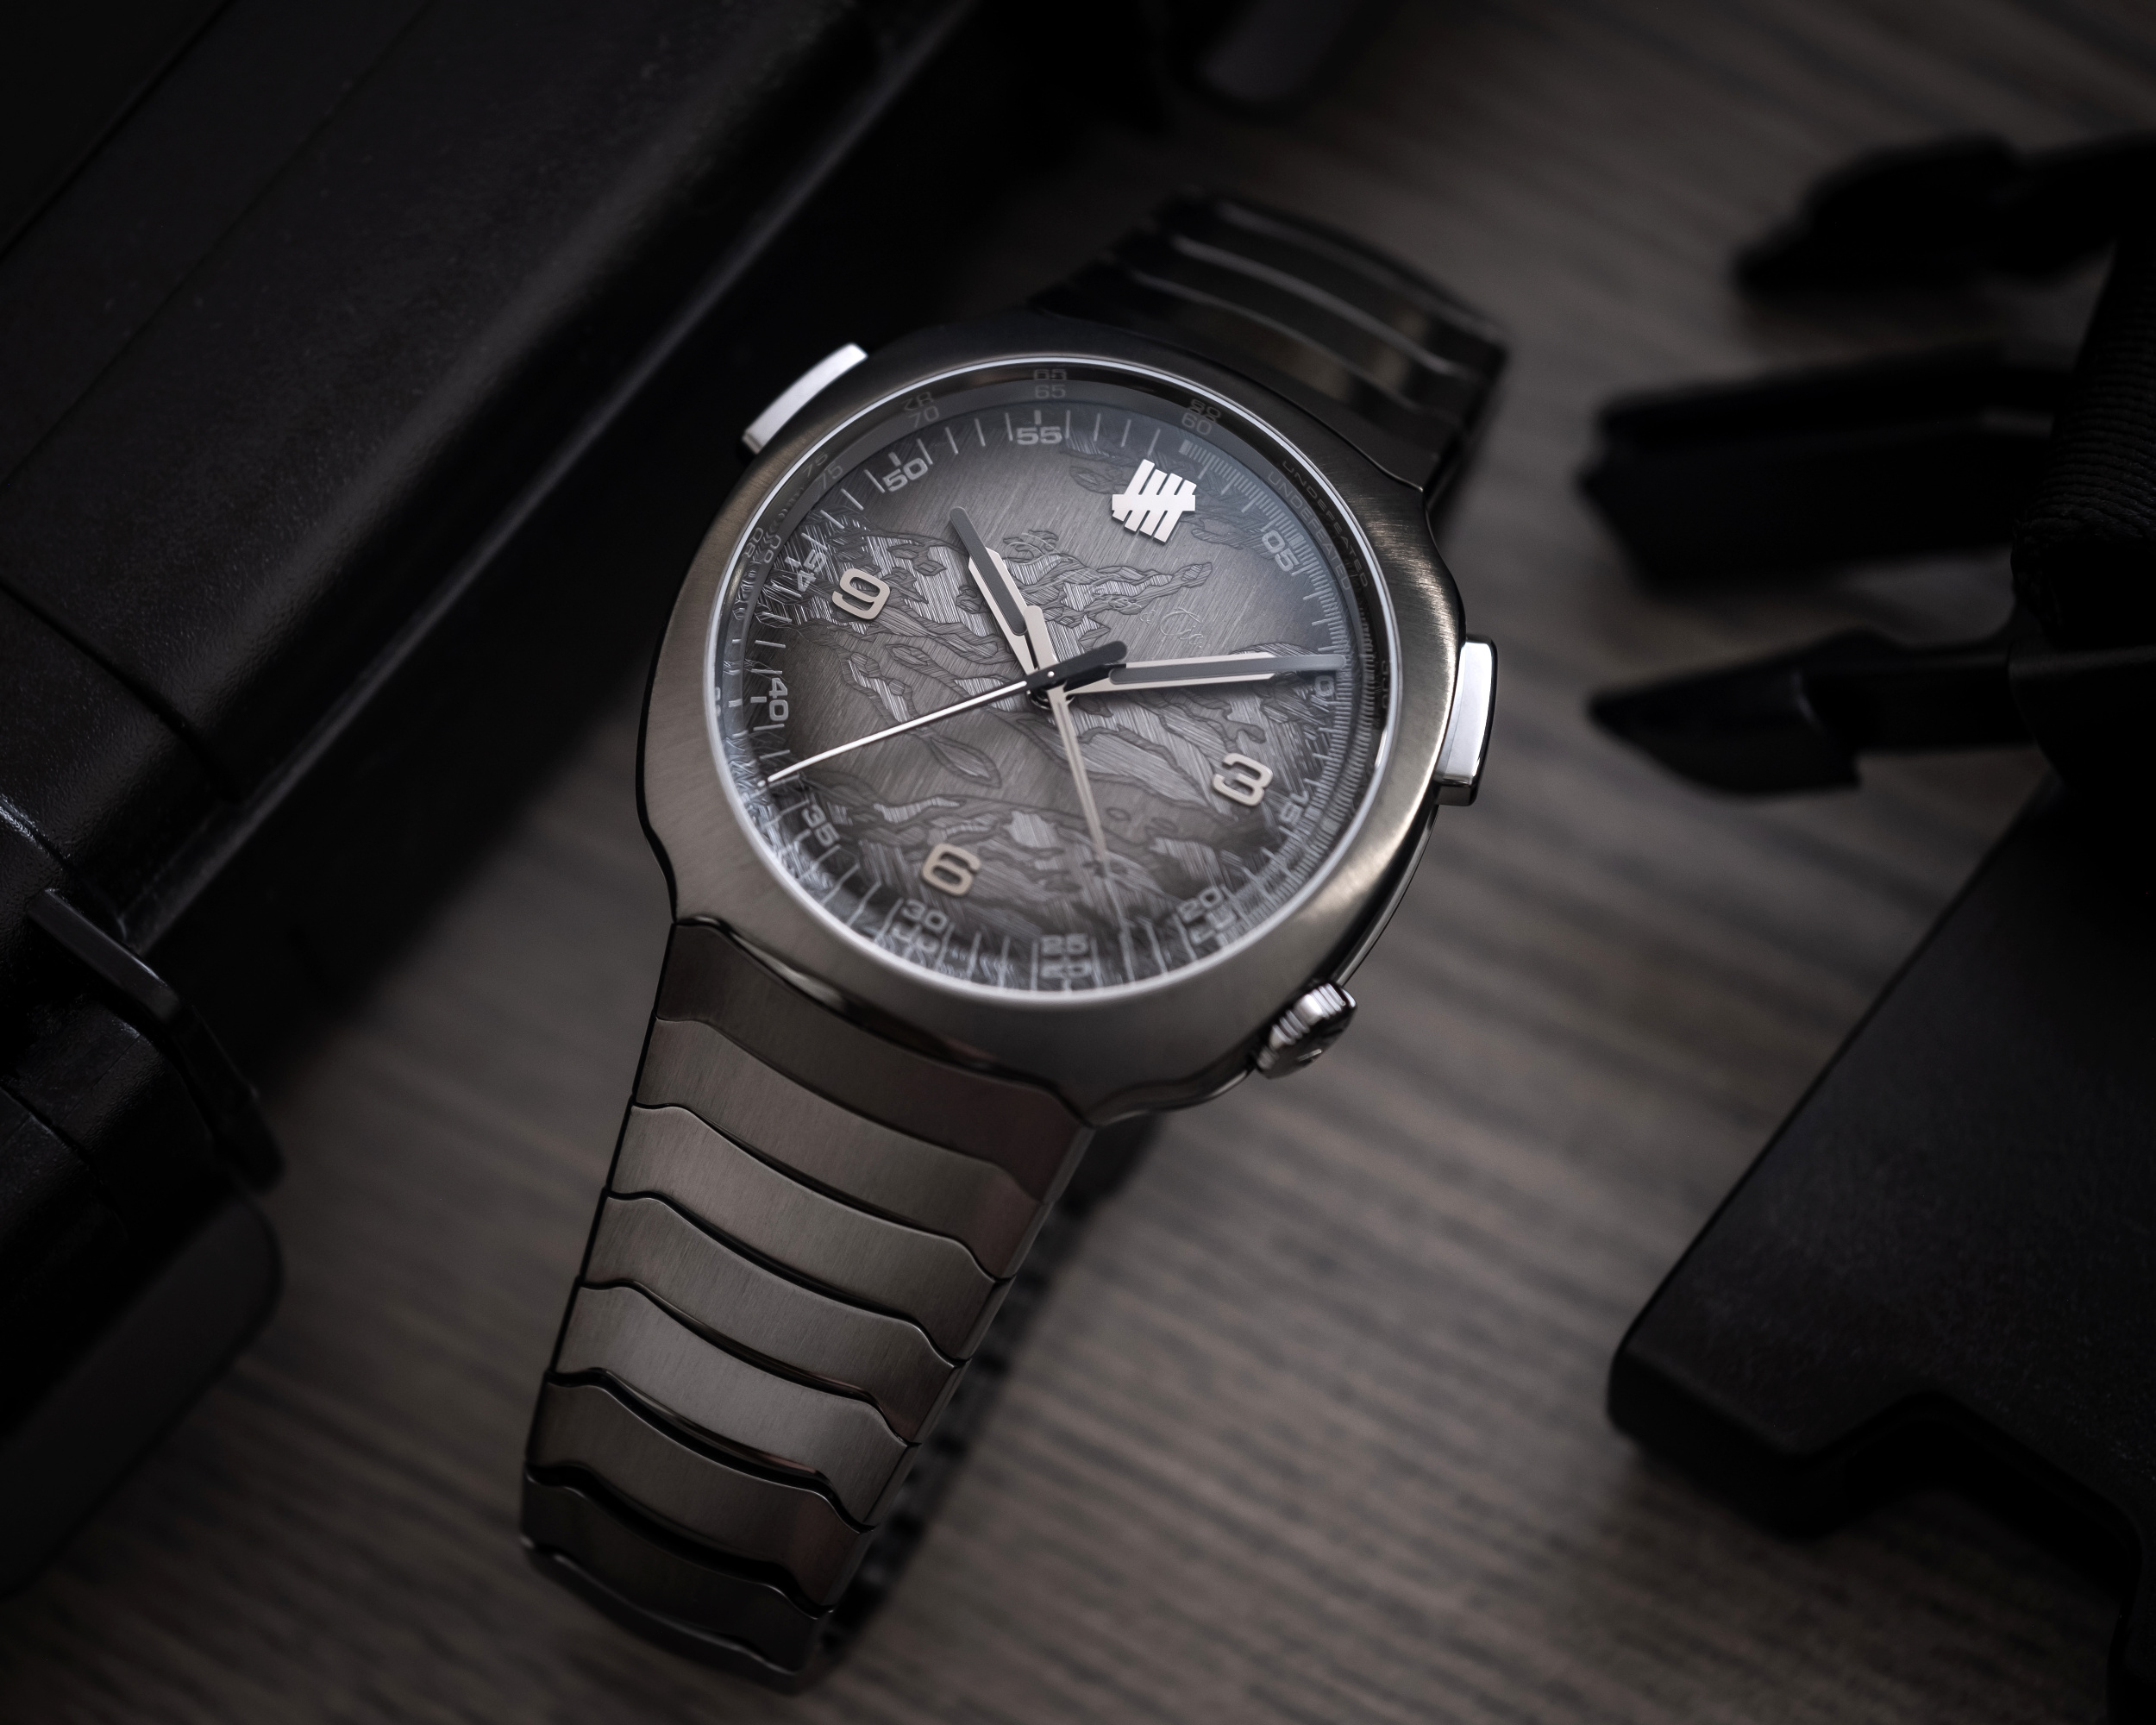 Moser Streamliner Chronograph Undefeated